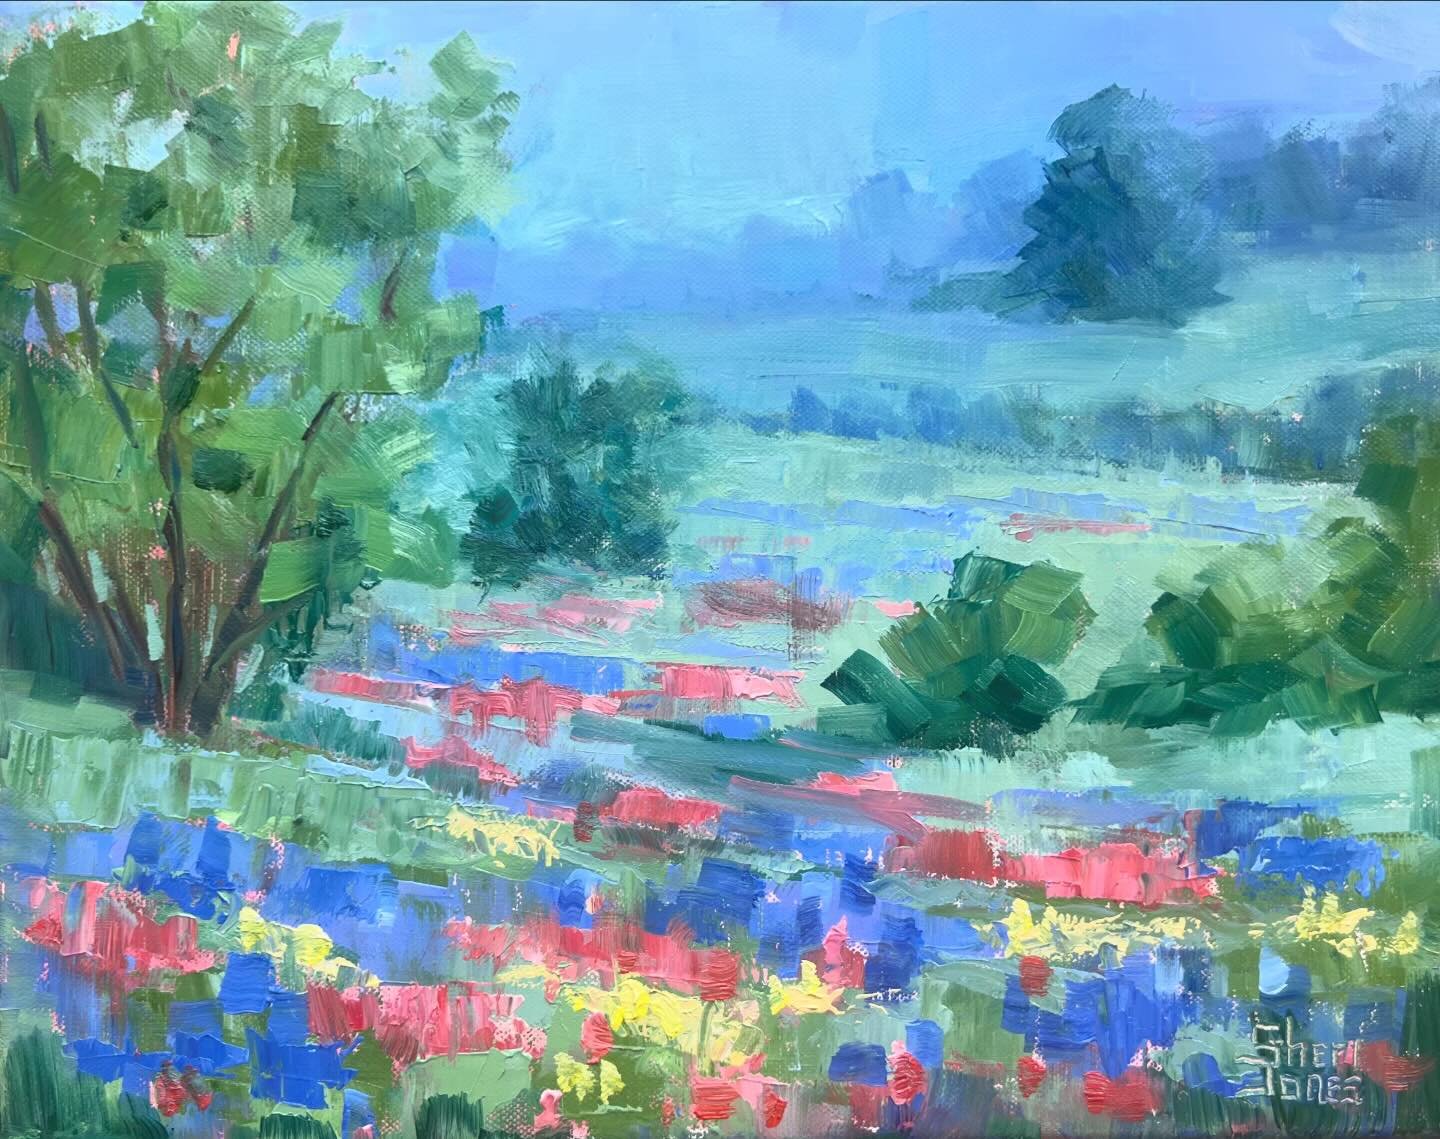 Holiday Park Wildflowers

11x14 oil on canvas

I met up with my artist friends to paint at Holiday Park on Benbrook Lake yesterday. The hills and surrounding landscape are dotted with wildflowers. There are still some blue bonnets with the reds and y